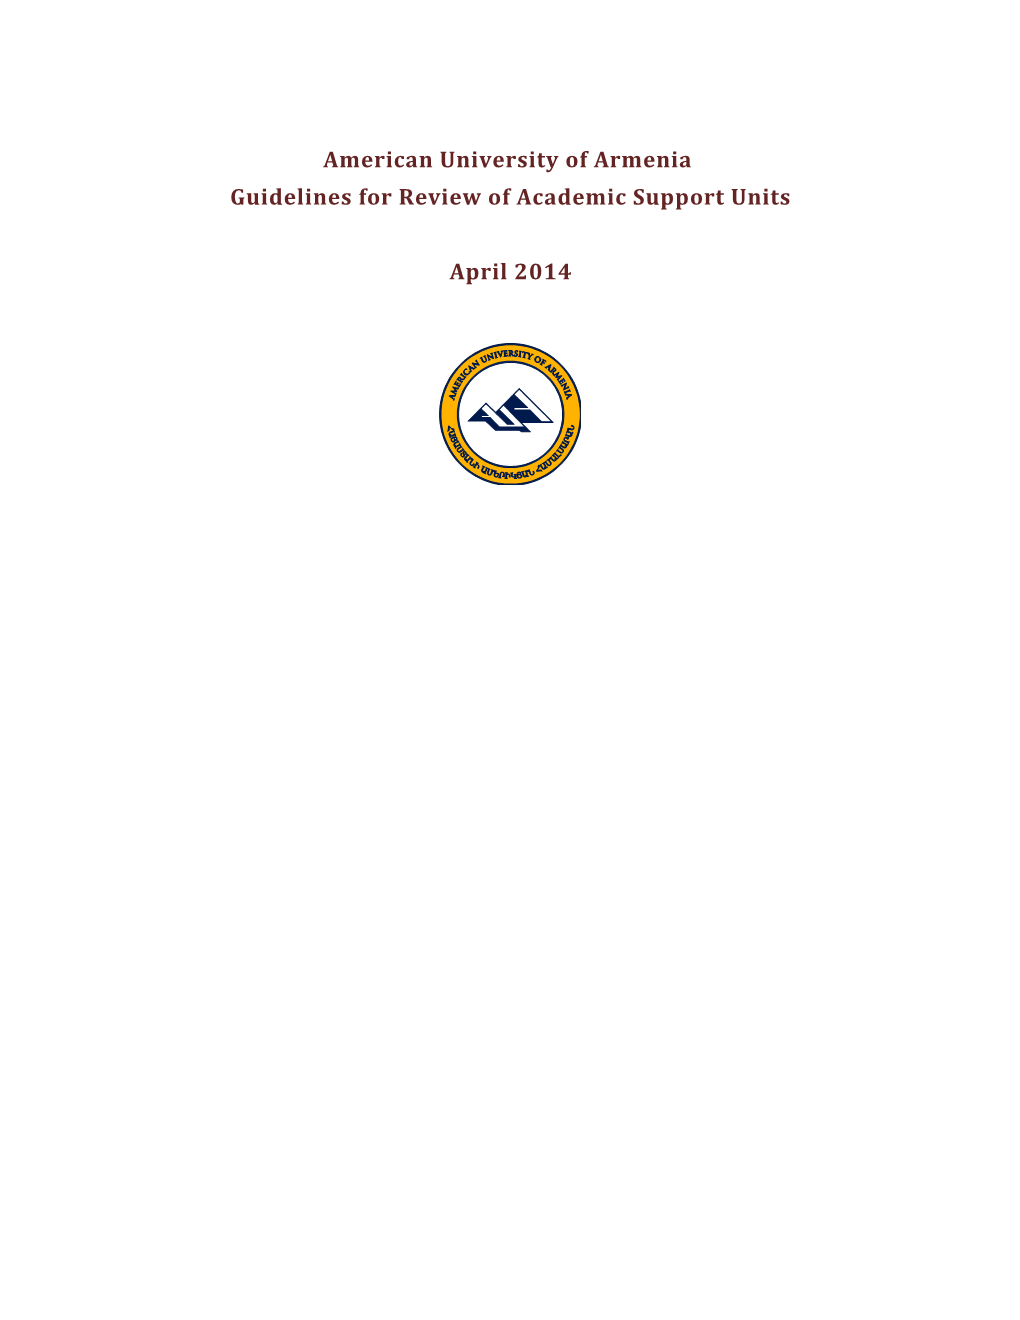 Guidelines for Review of Academic Support Units